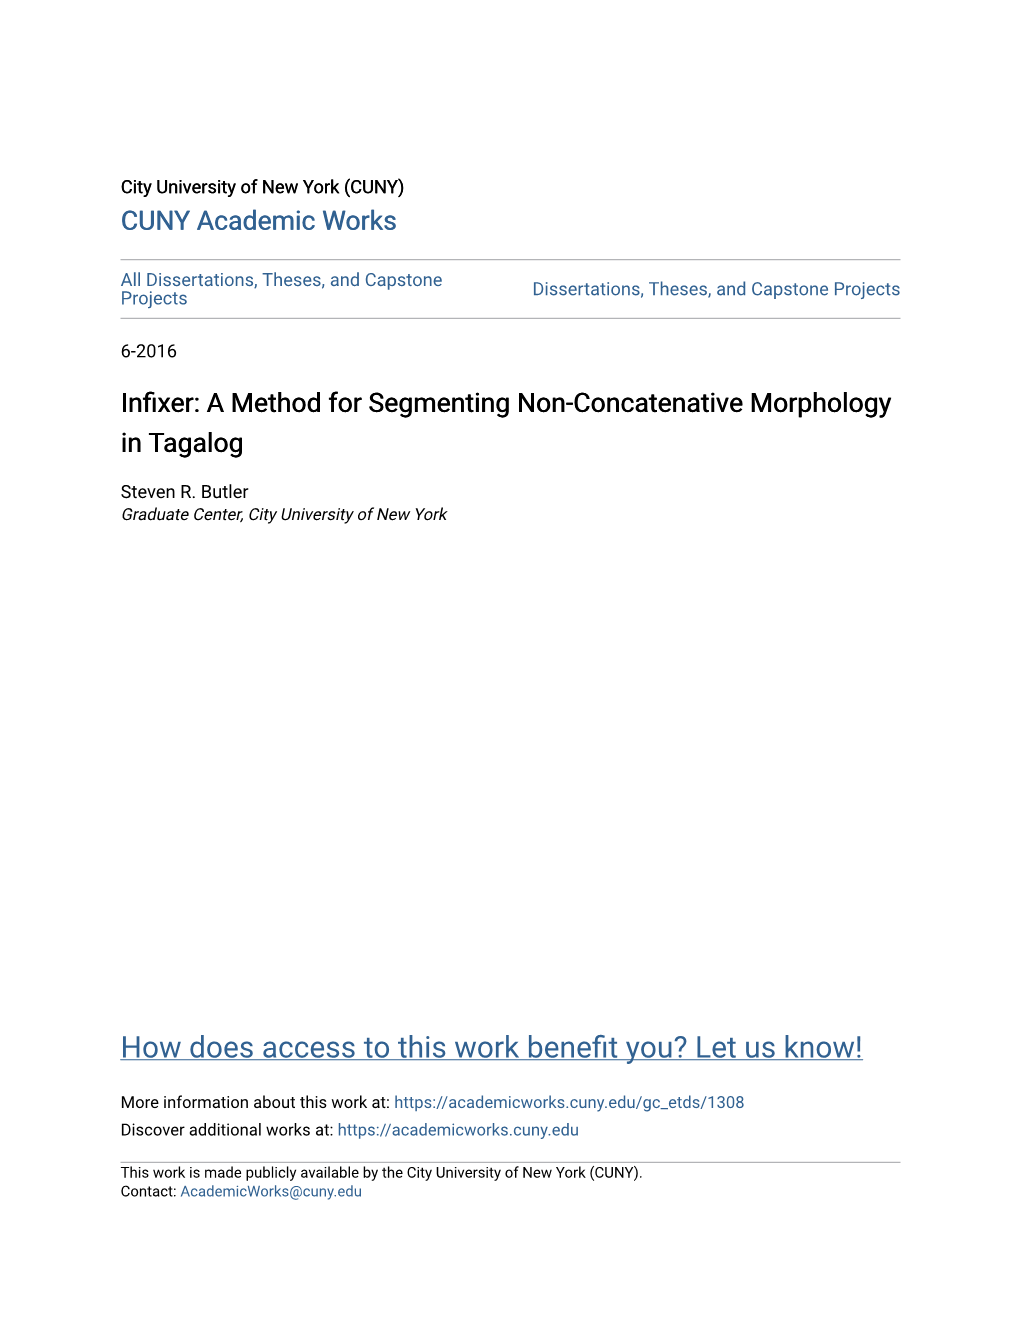 Infixer: a Method for Segmenting Non-Concatenative Morphology in Tagalog